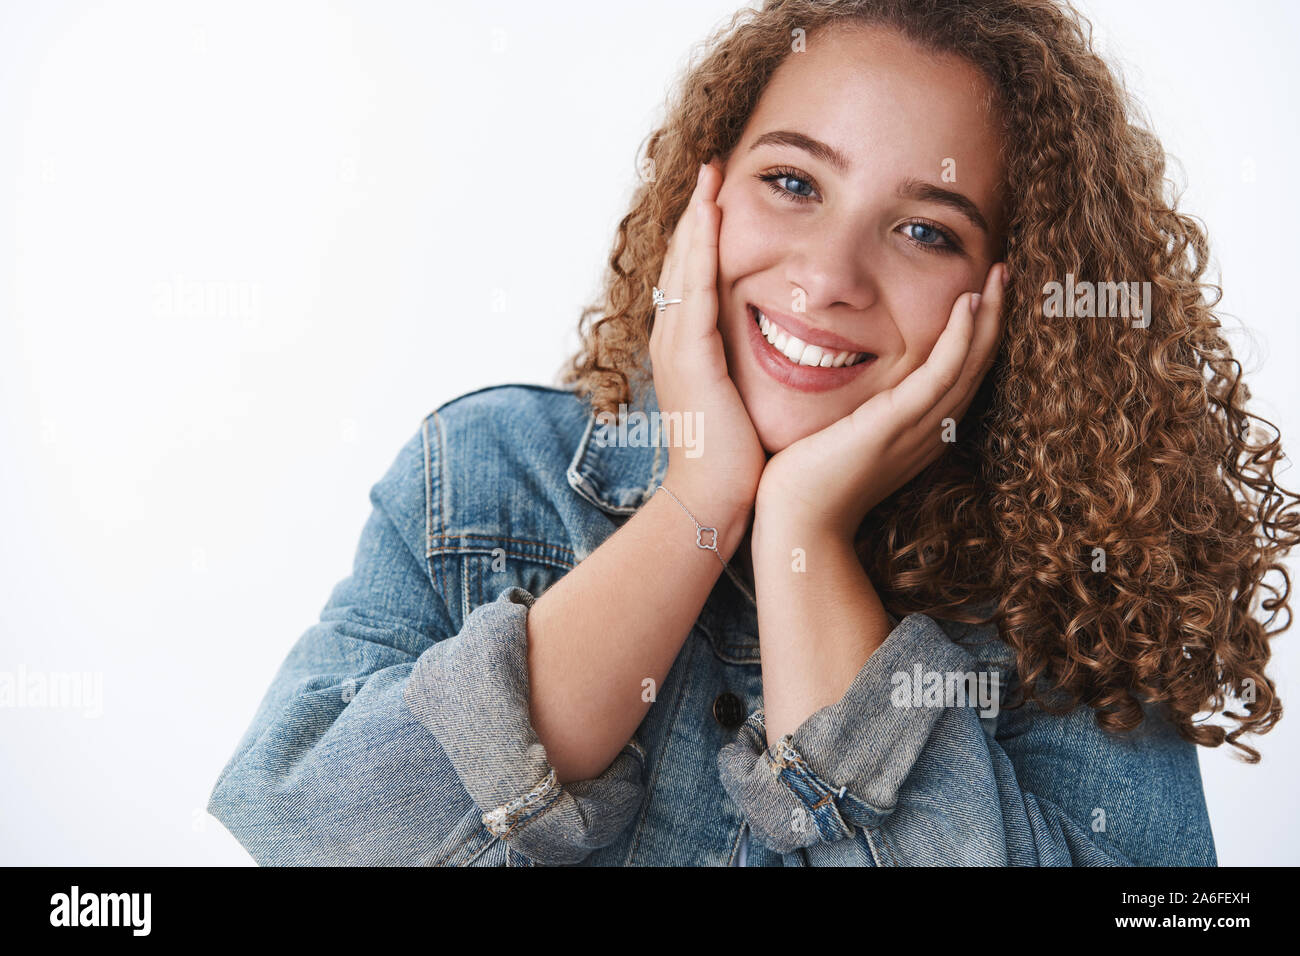 Close-up tender happy delighted excited charming curly-haired chubby girlfriend feeling upbeat touching cheeks joyfully blushing tilting head feeling Stock Photo